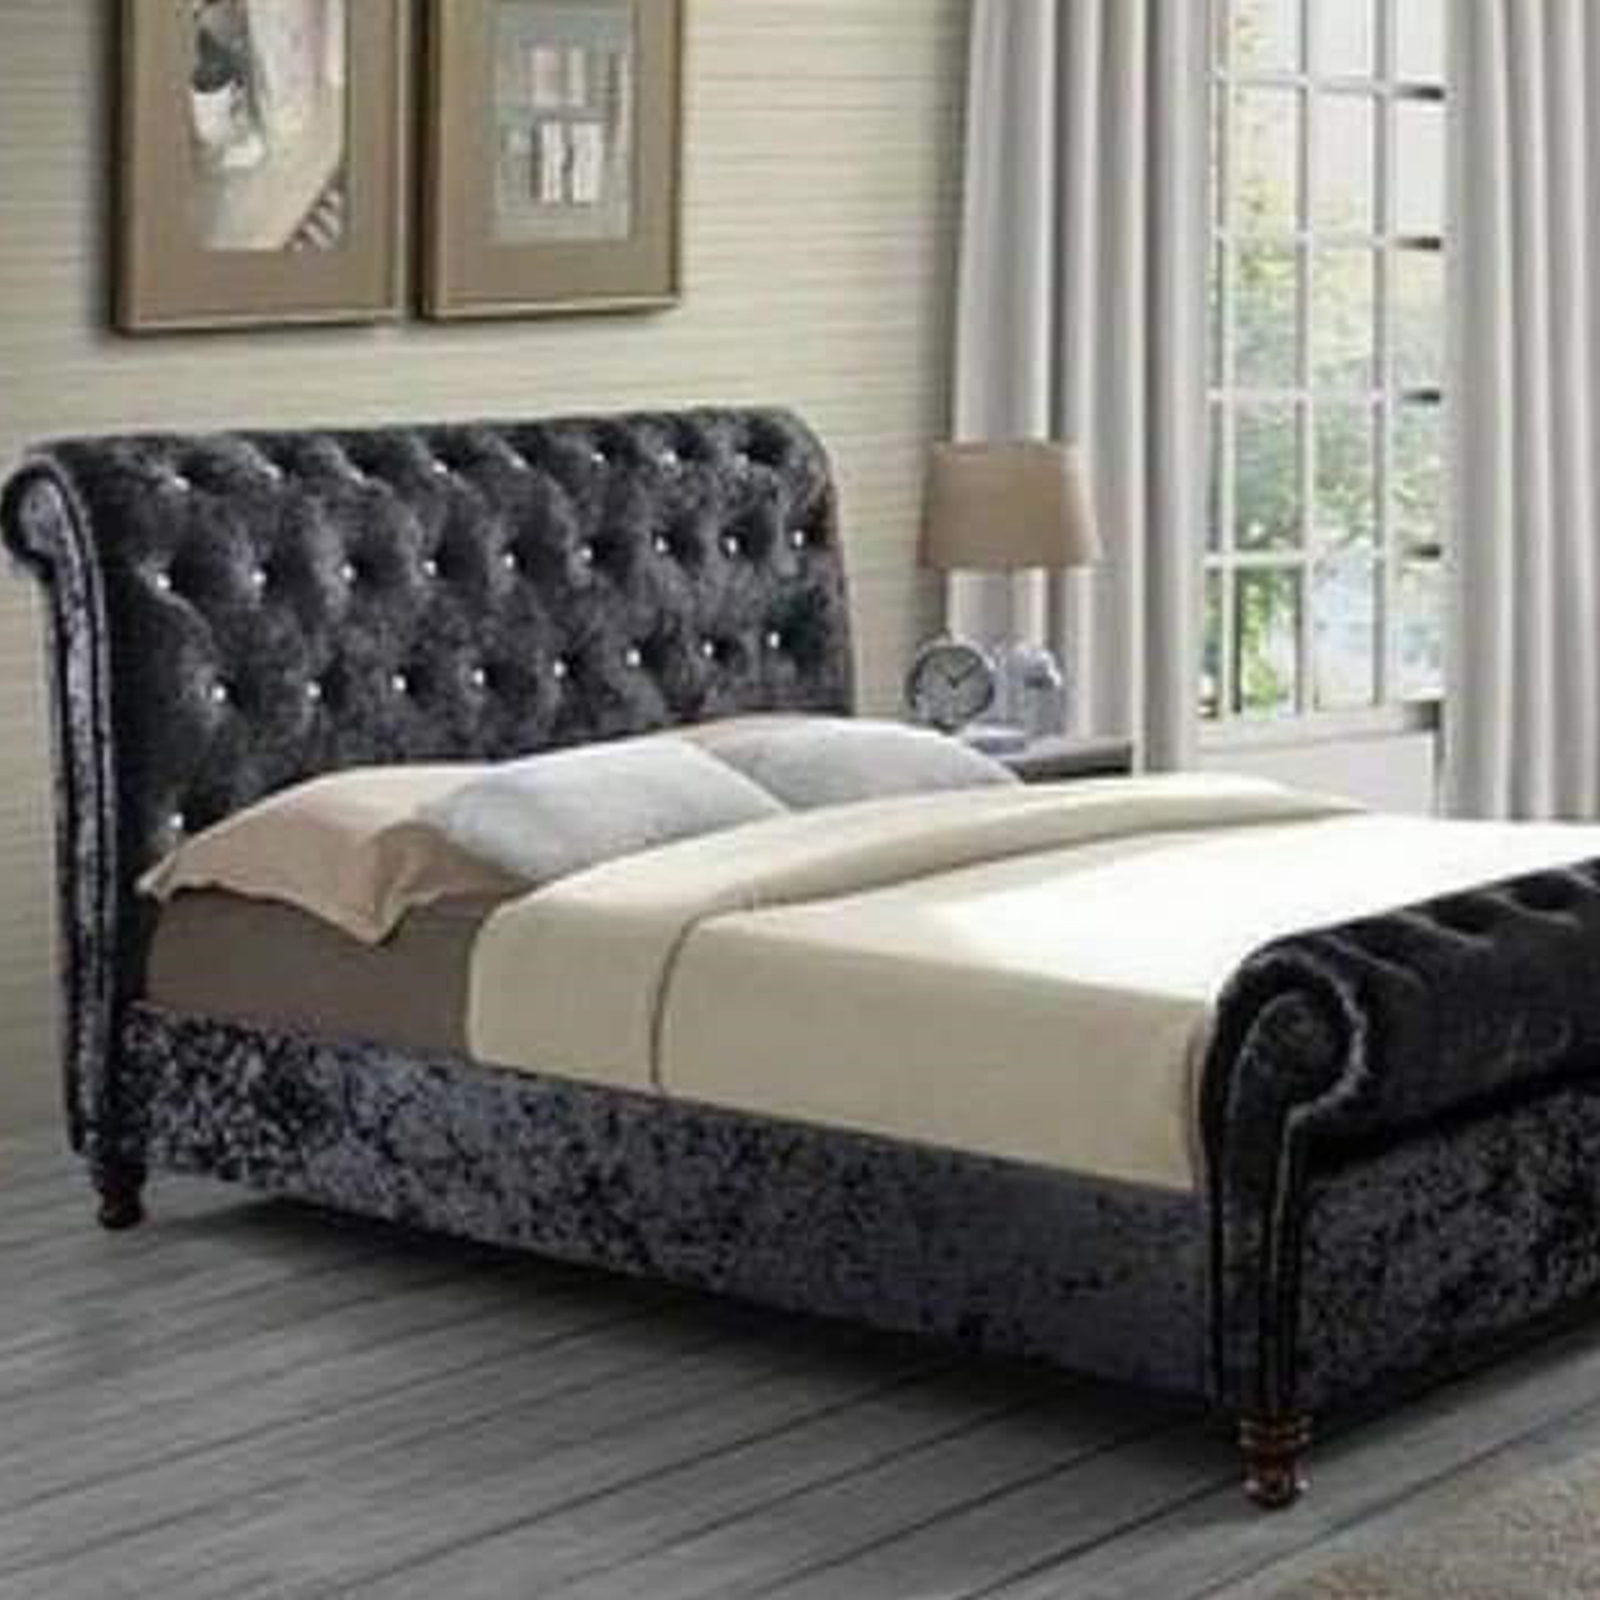 Reece And Swan Chesterfield Sleigh Bed Single 3ft Crushed Velvet Optional Mattress 